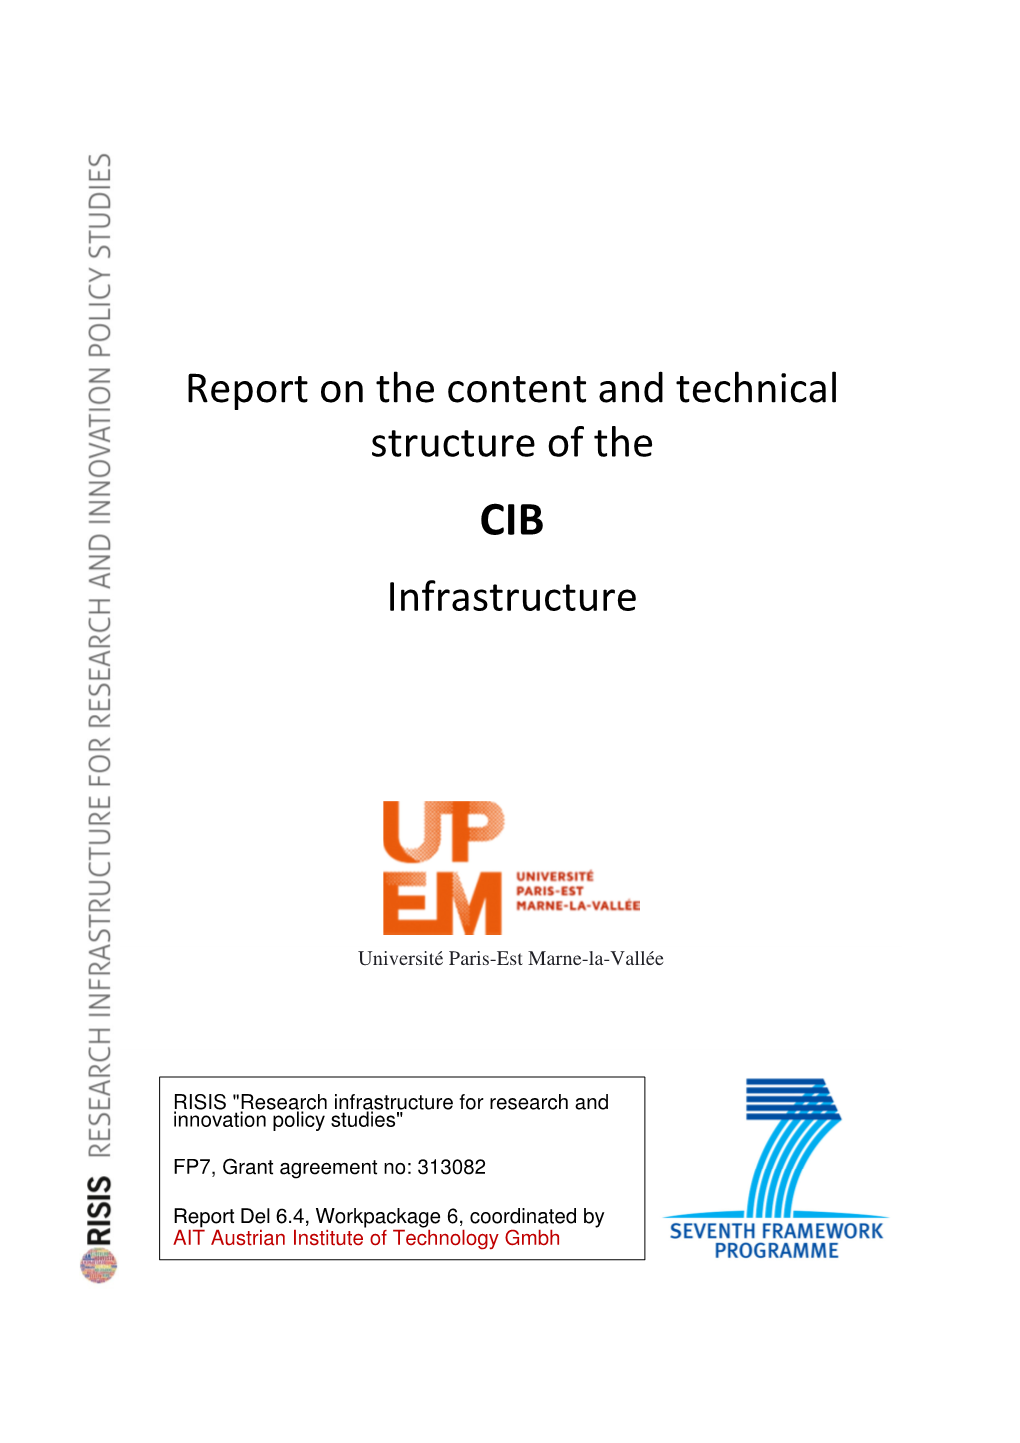 Report on the Content and Technical Structure of the Infrastructure